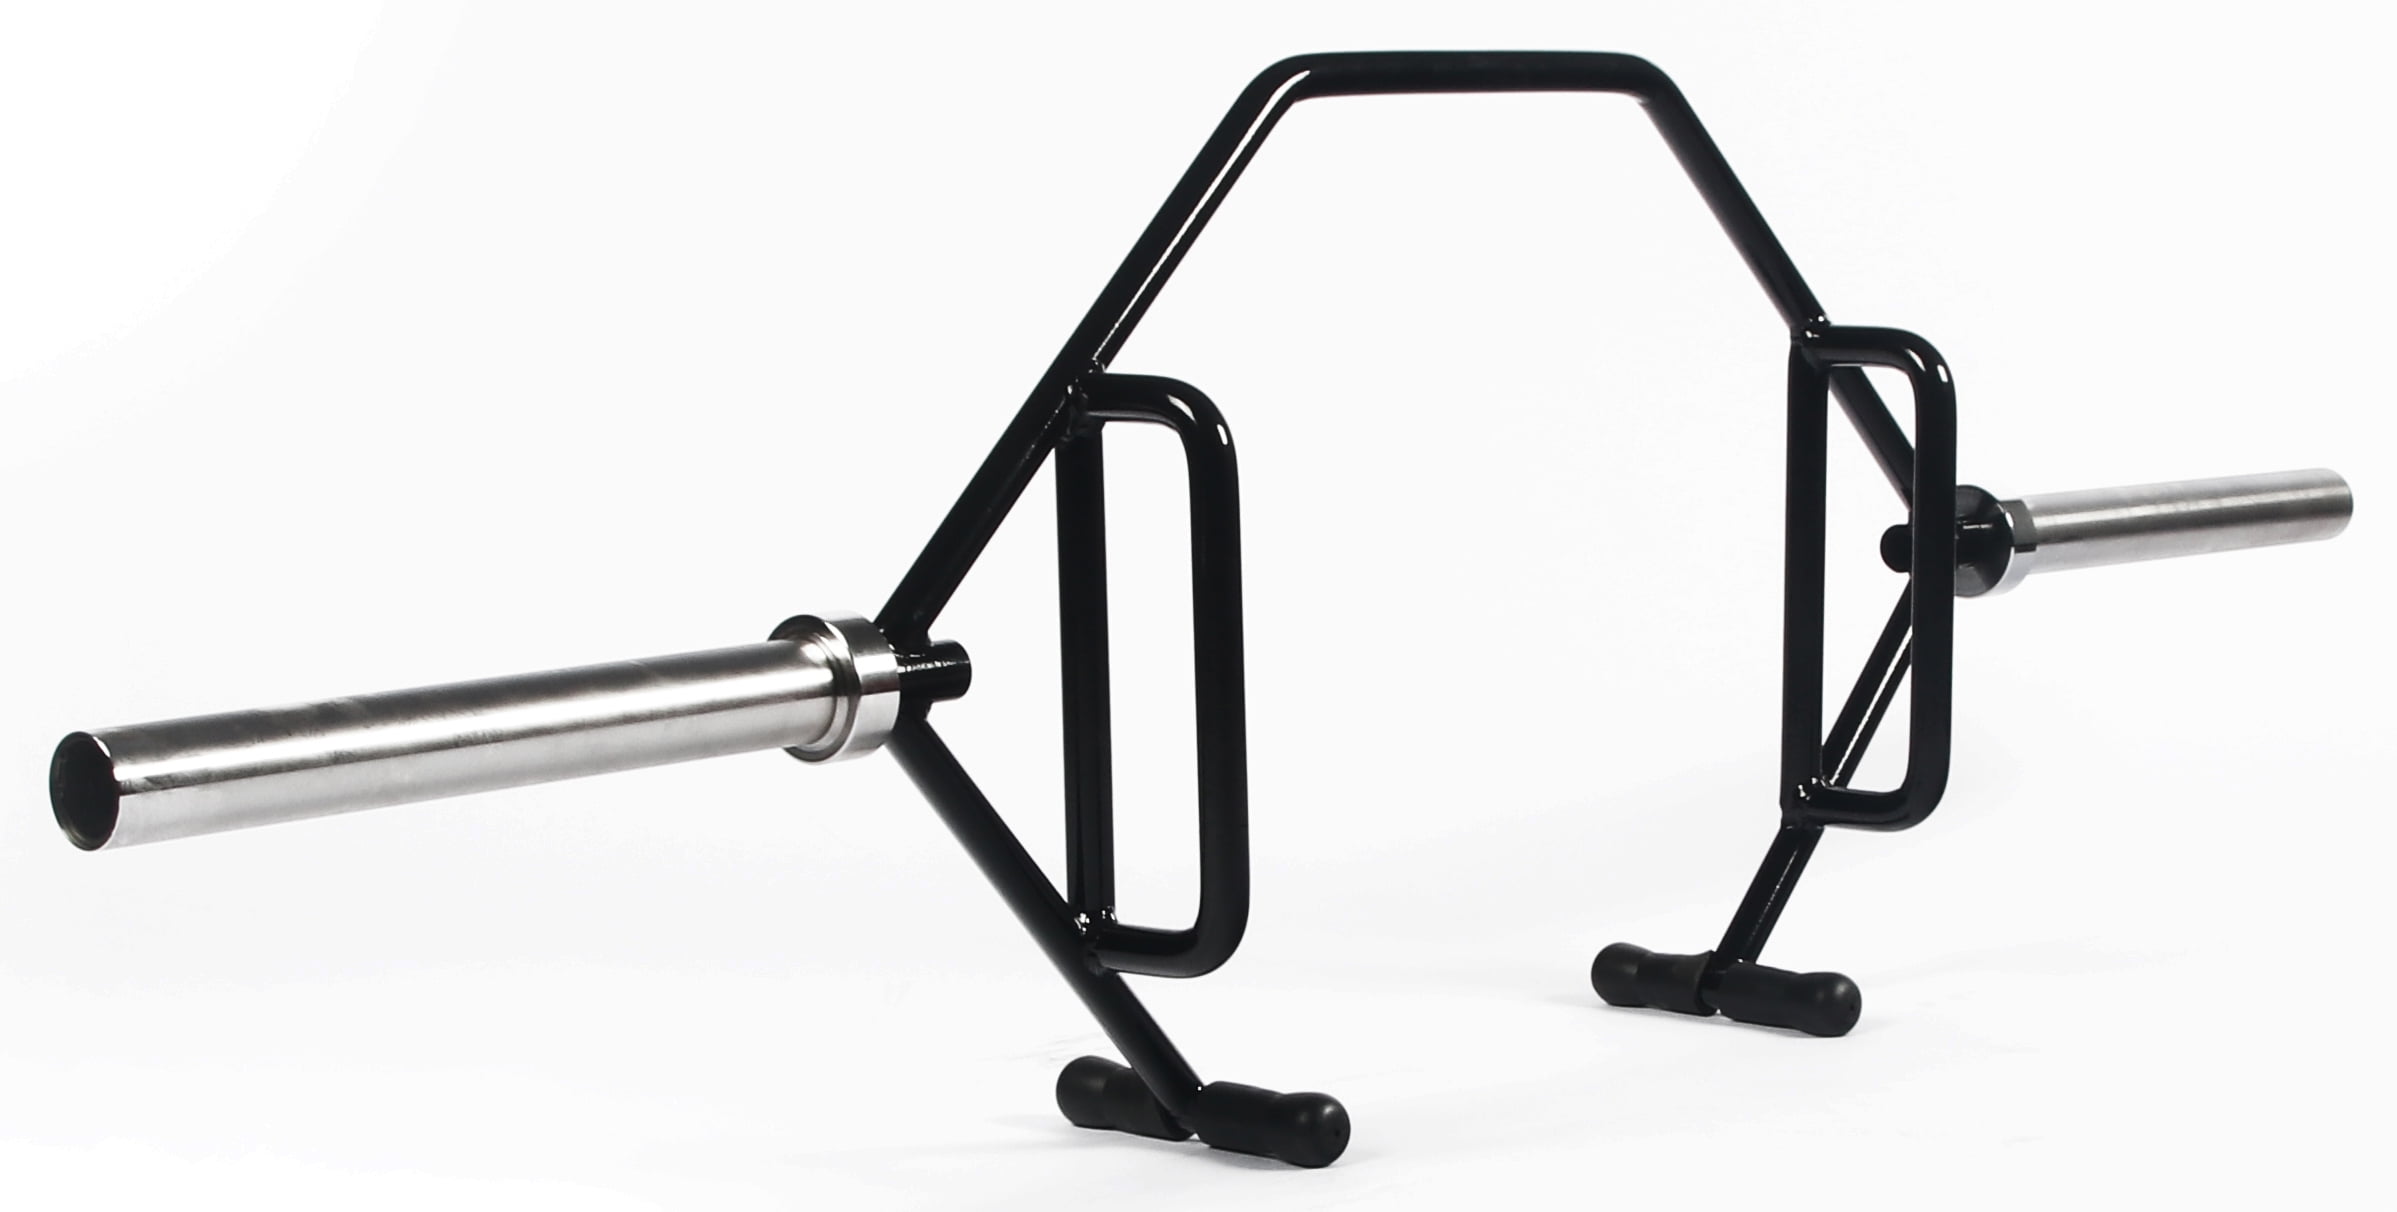 BalanceFrom Olympic 2-Inch Hex Weight Lifting Trap Bar $55.00